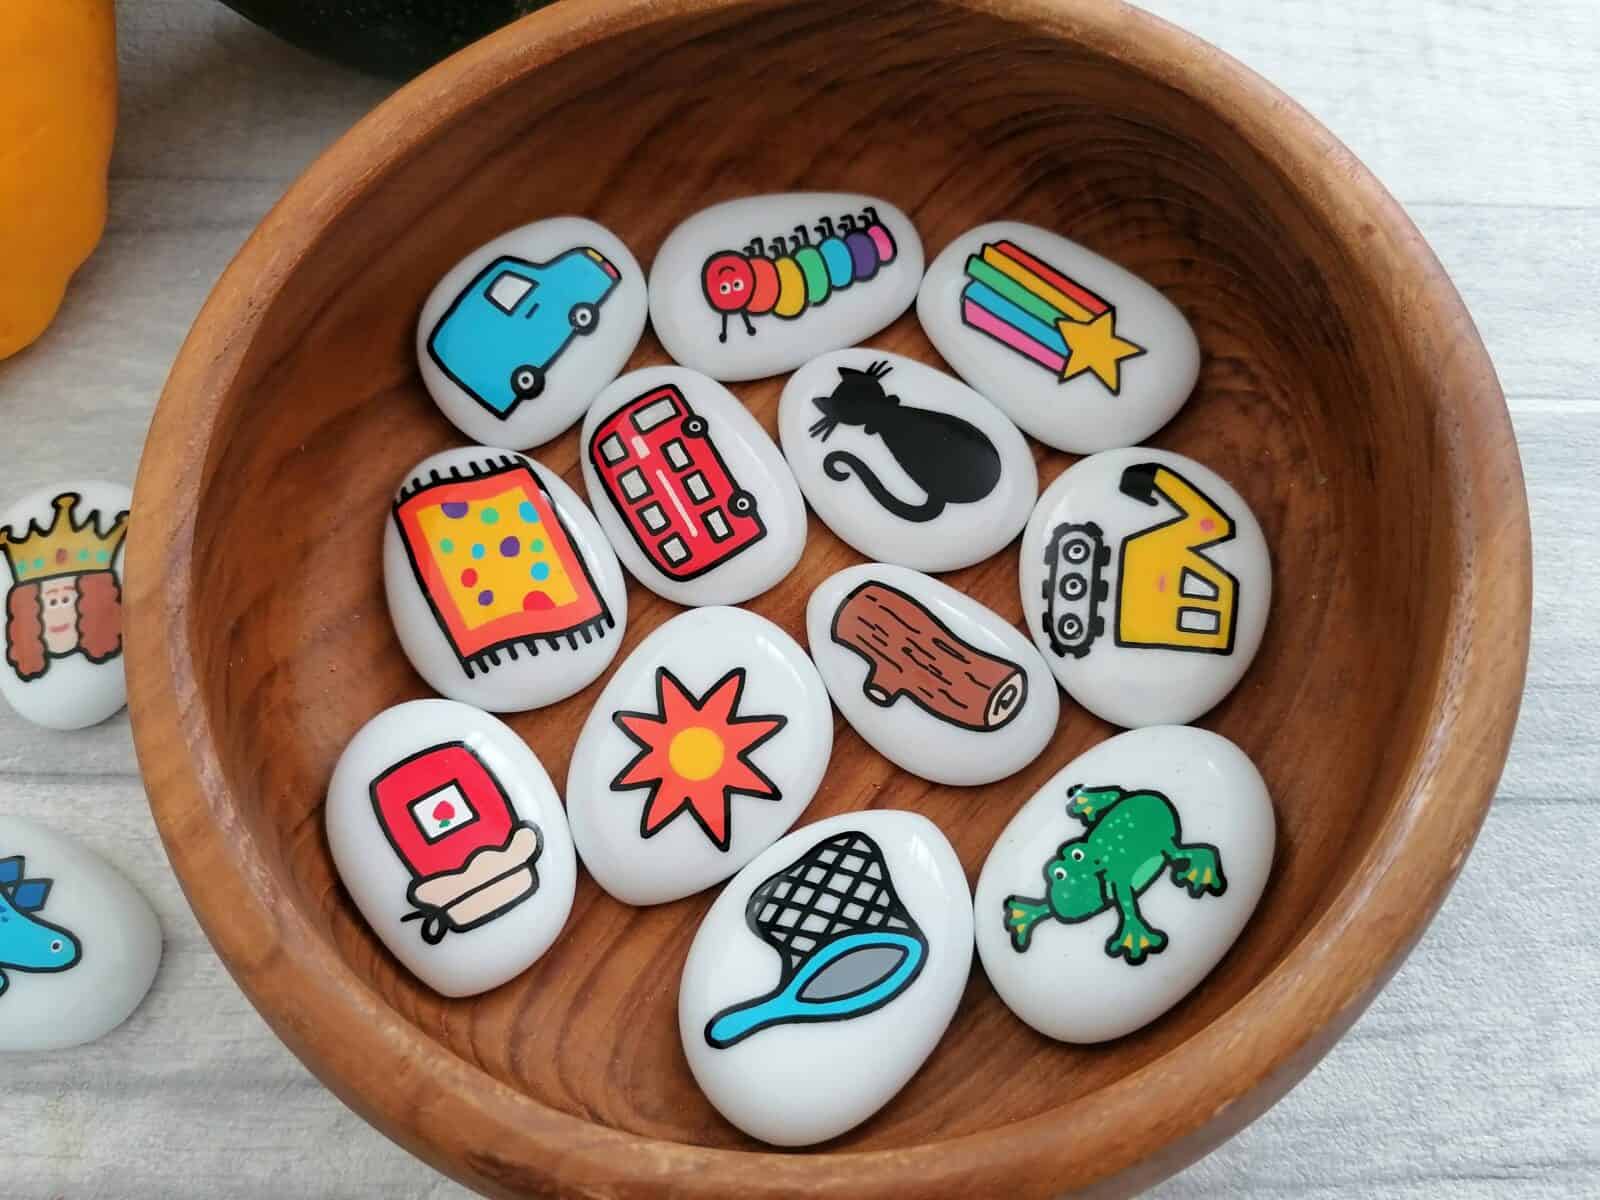 A wooden small bowl is filled with glass white pebbles with various designs painted on such as bus, sun, cat, digger, net, frog, van, caterpillar, shooting star, mat, jam and log.